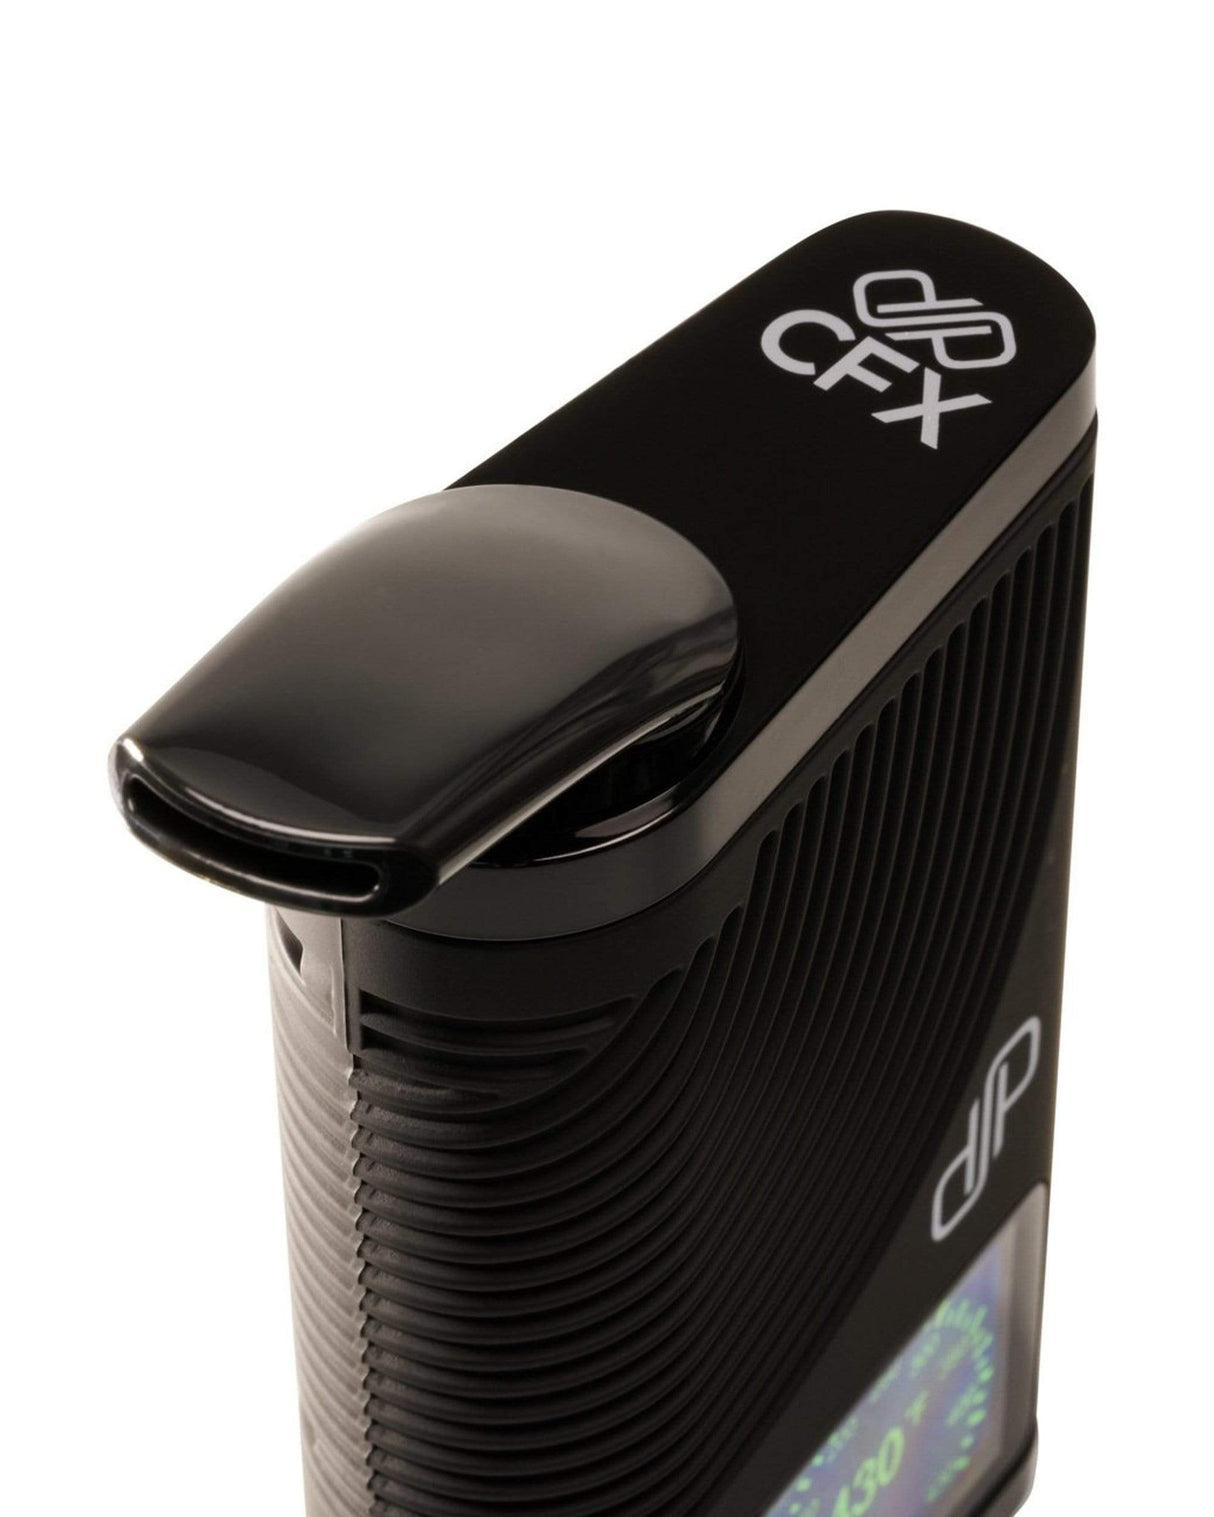 Boundless CFX Vaporizer - Compact Portable Design for Dry Herbs and Concentrates, Side View